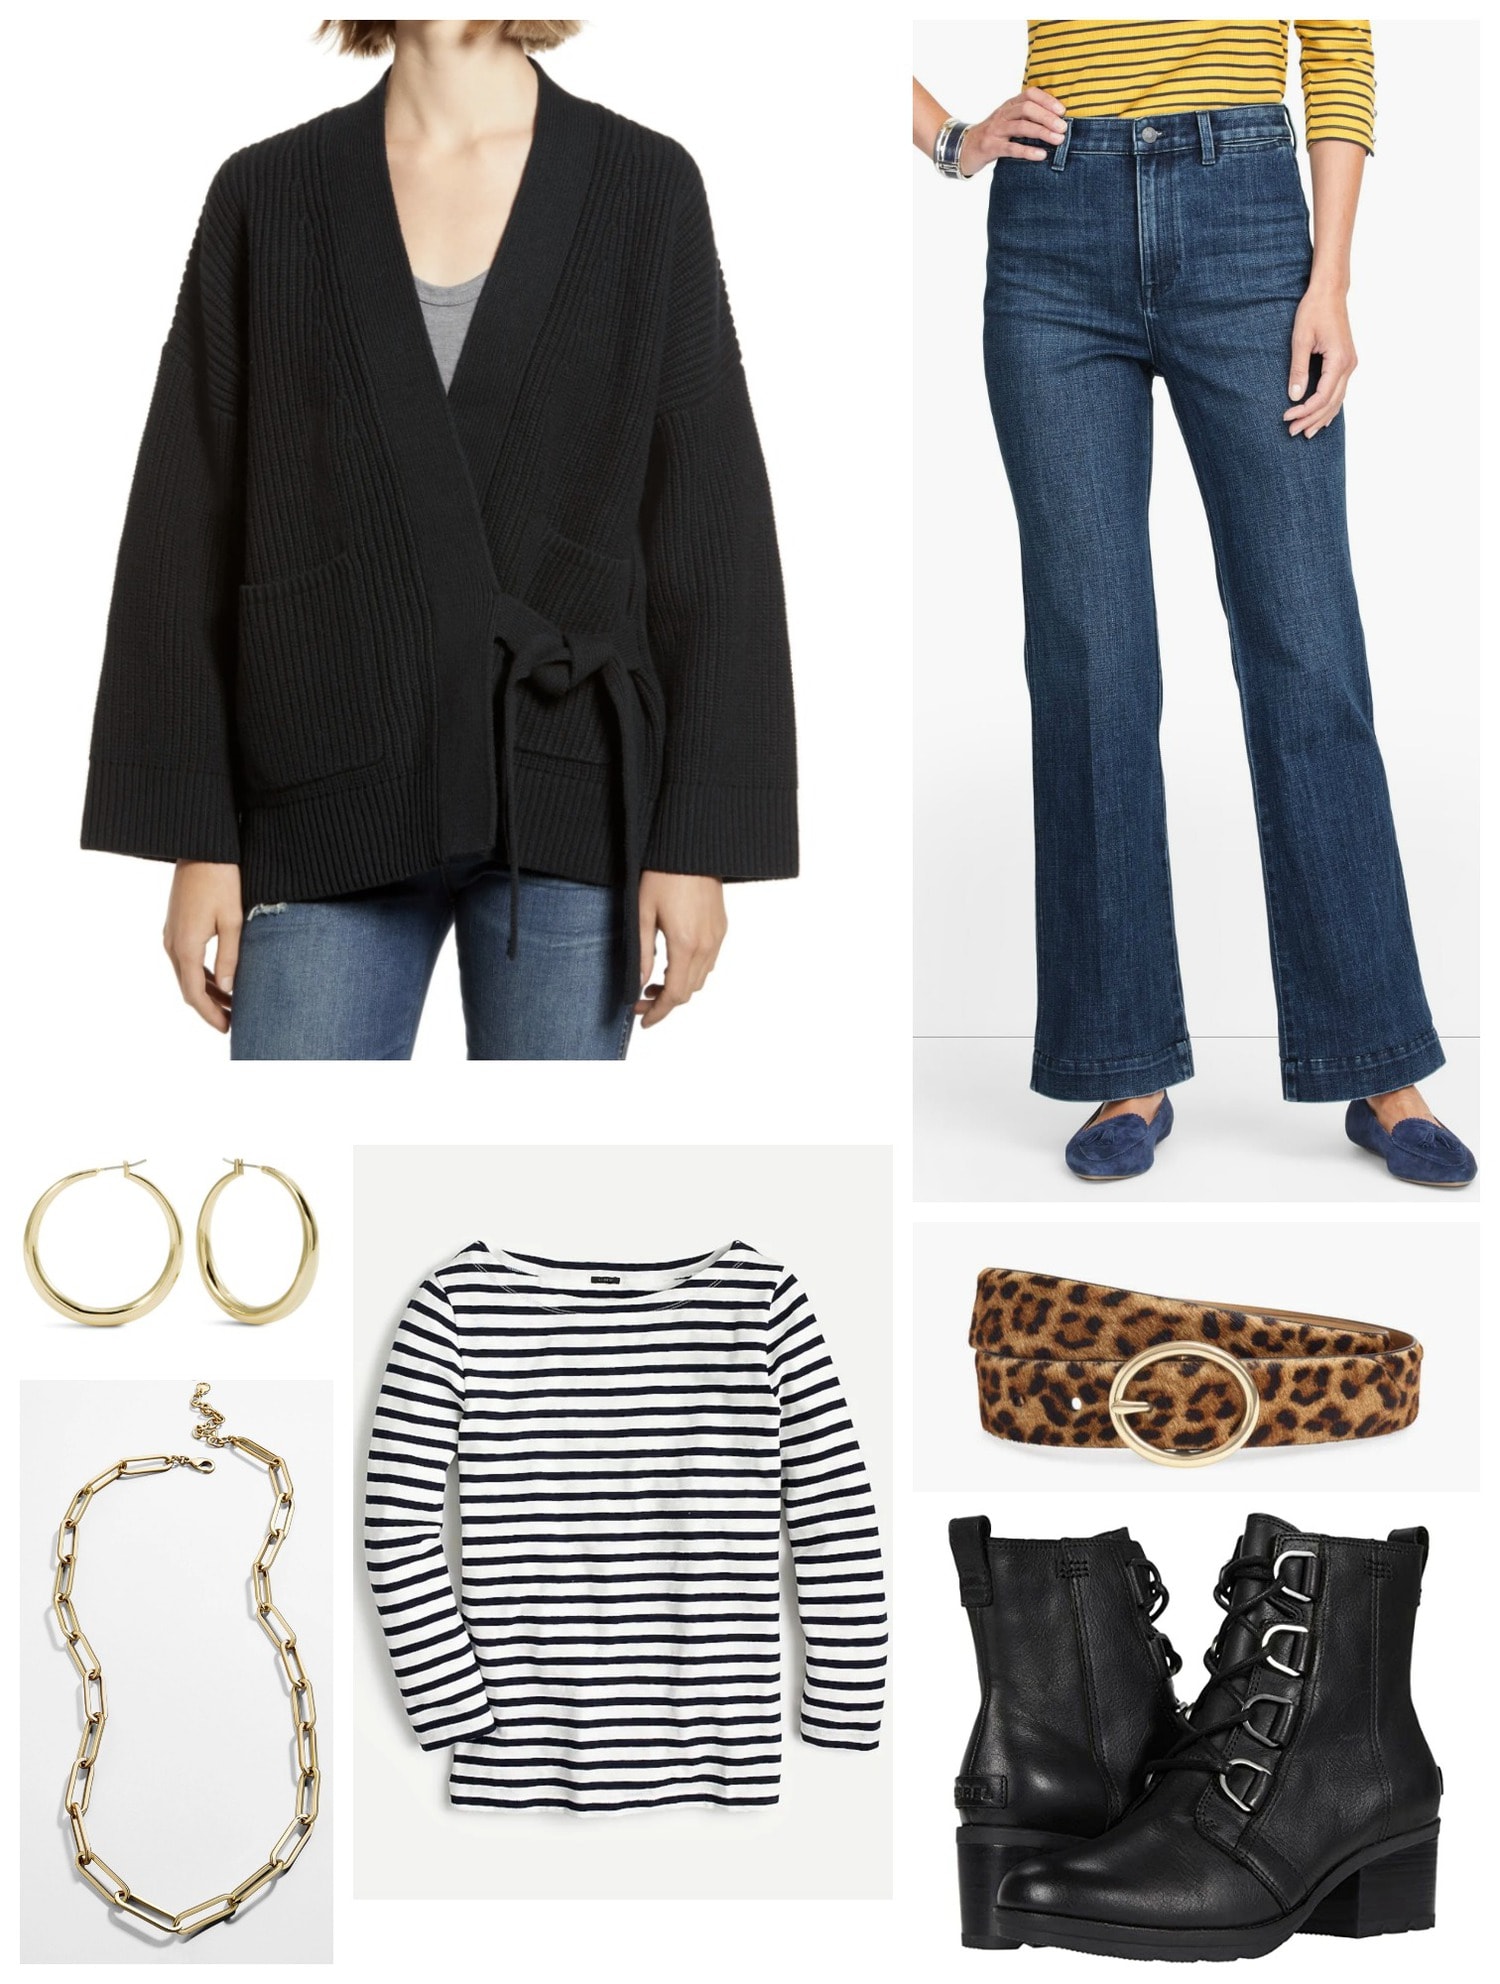 Stripes and leopard bring together a black cardigan and flared jeans